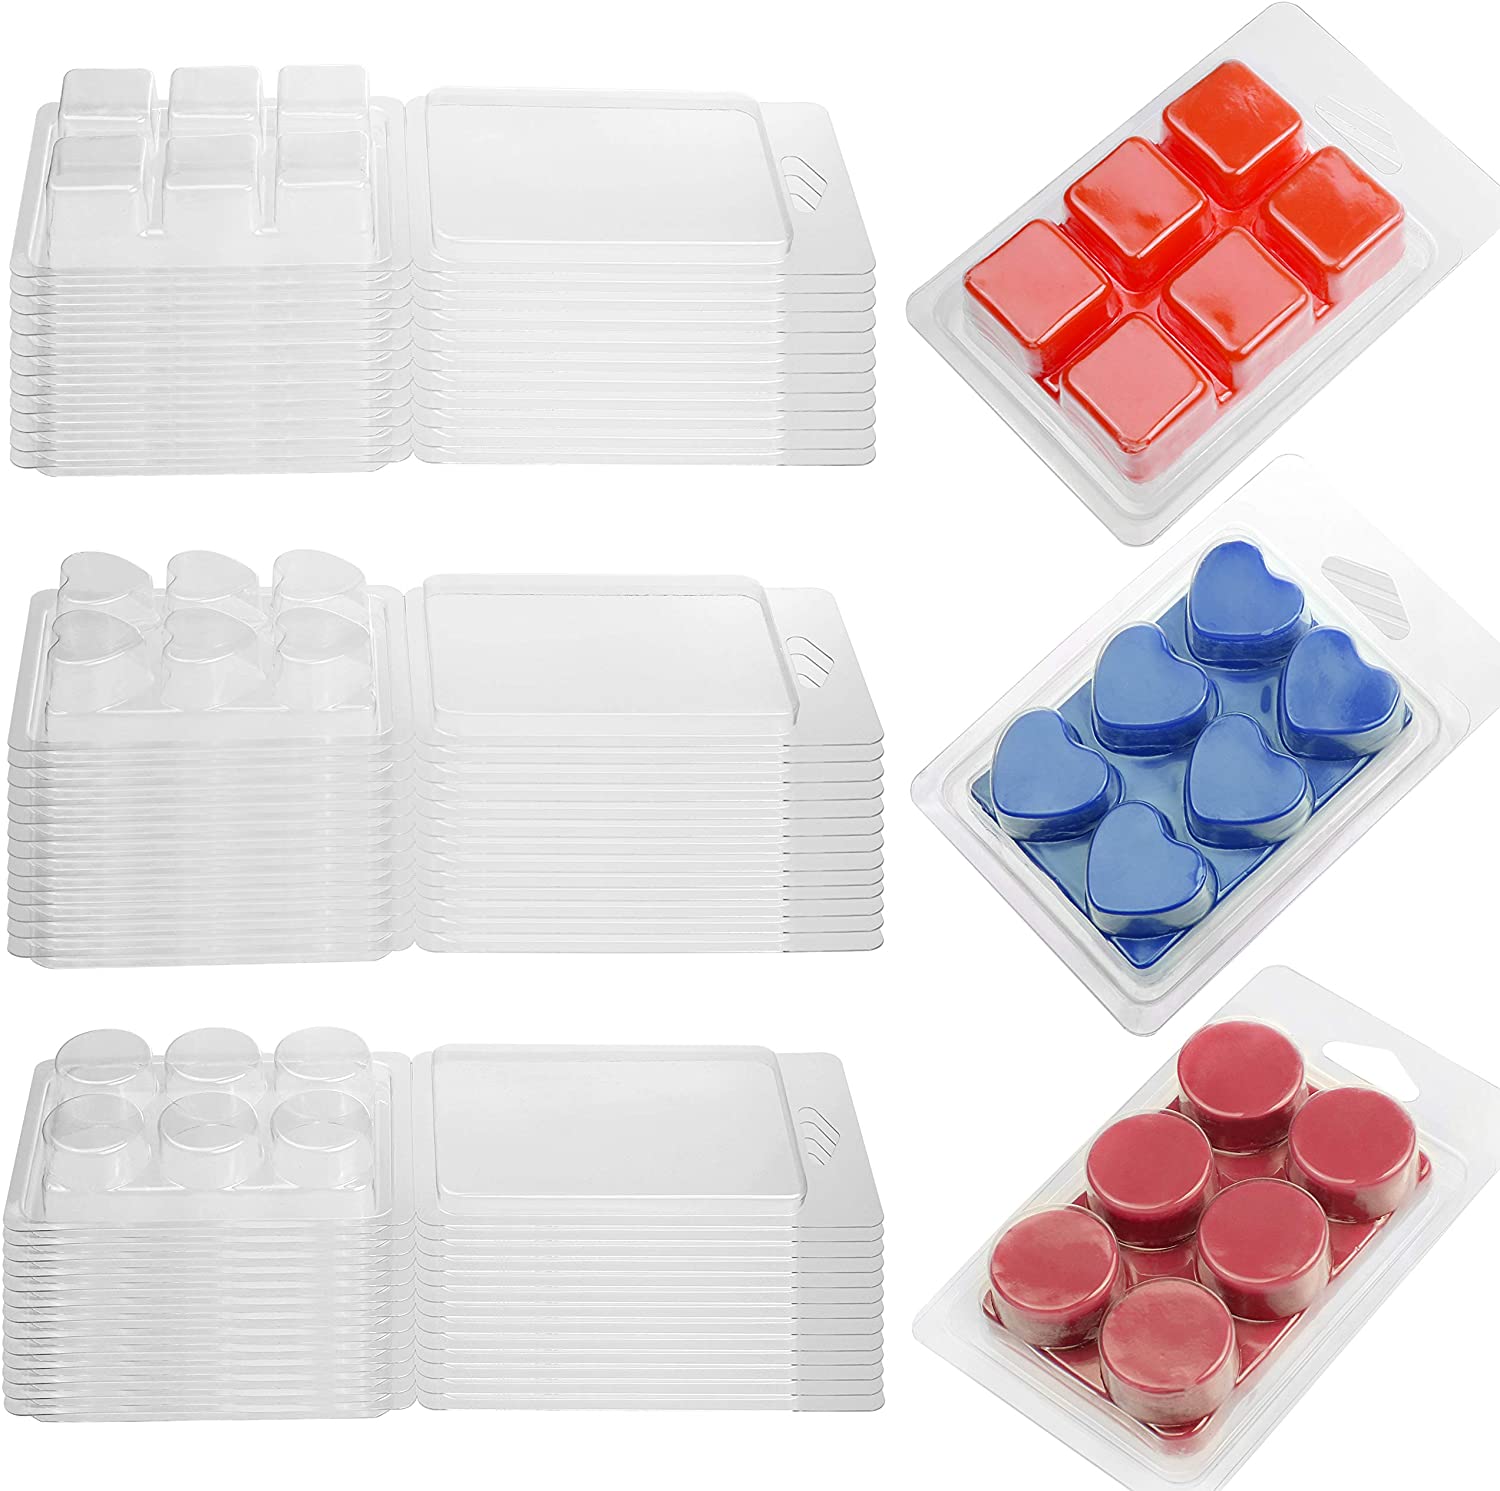 containers for wax melts